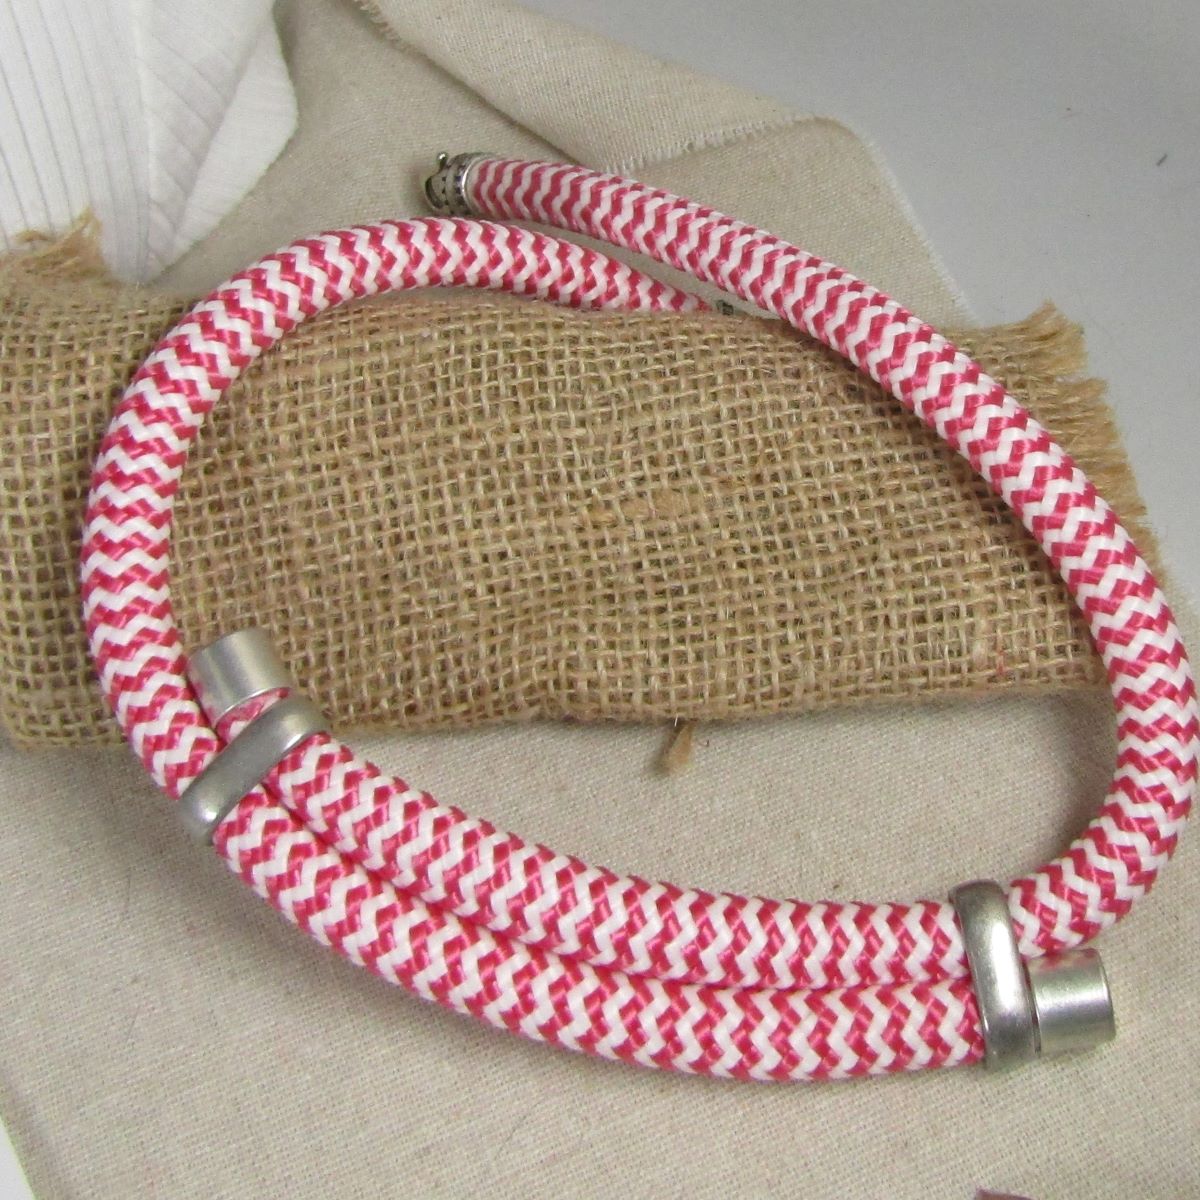 Pink Candy Striped Cotton Rope Cord Necklace Uniquely Different Style - VP's Jewelry